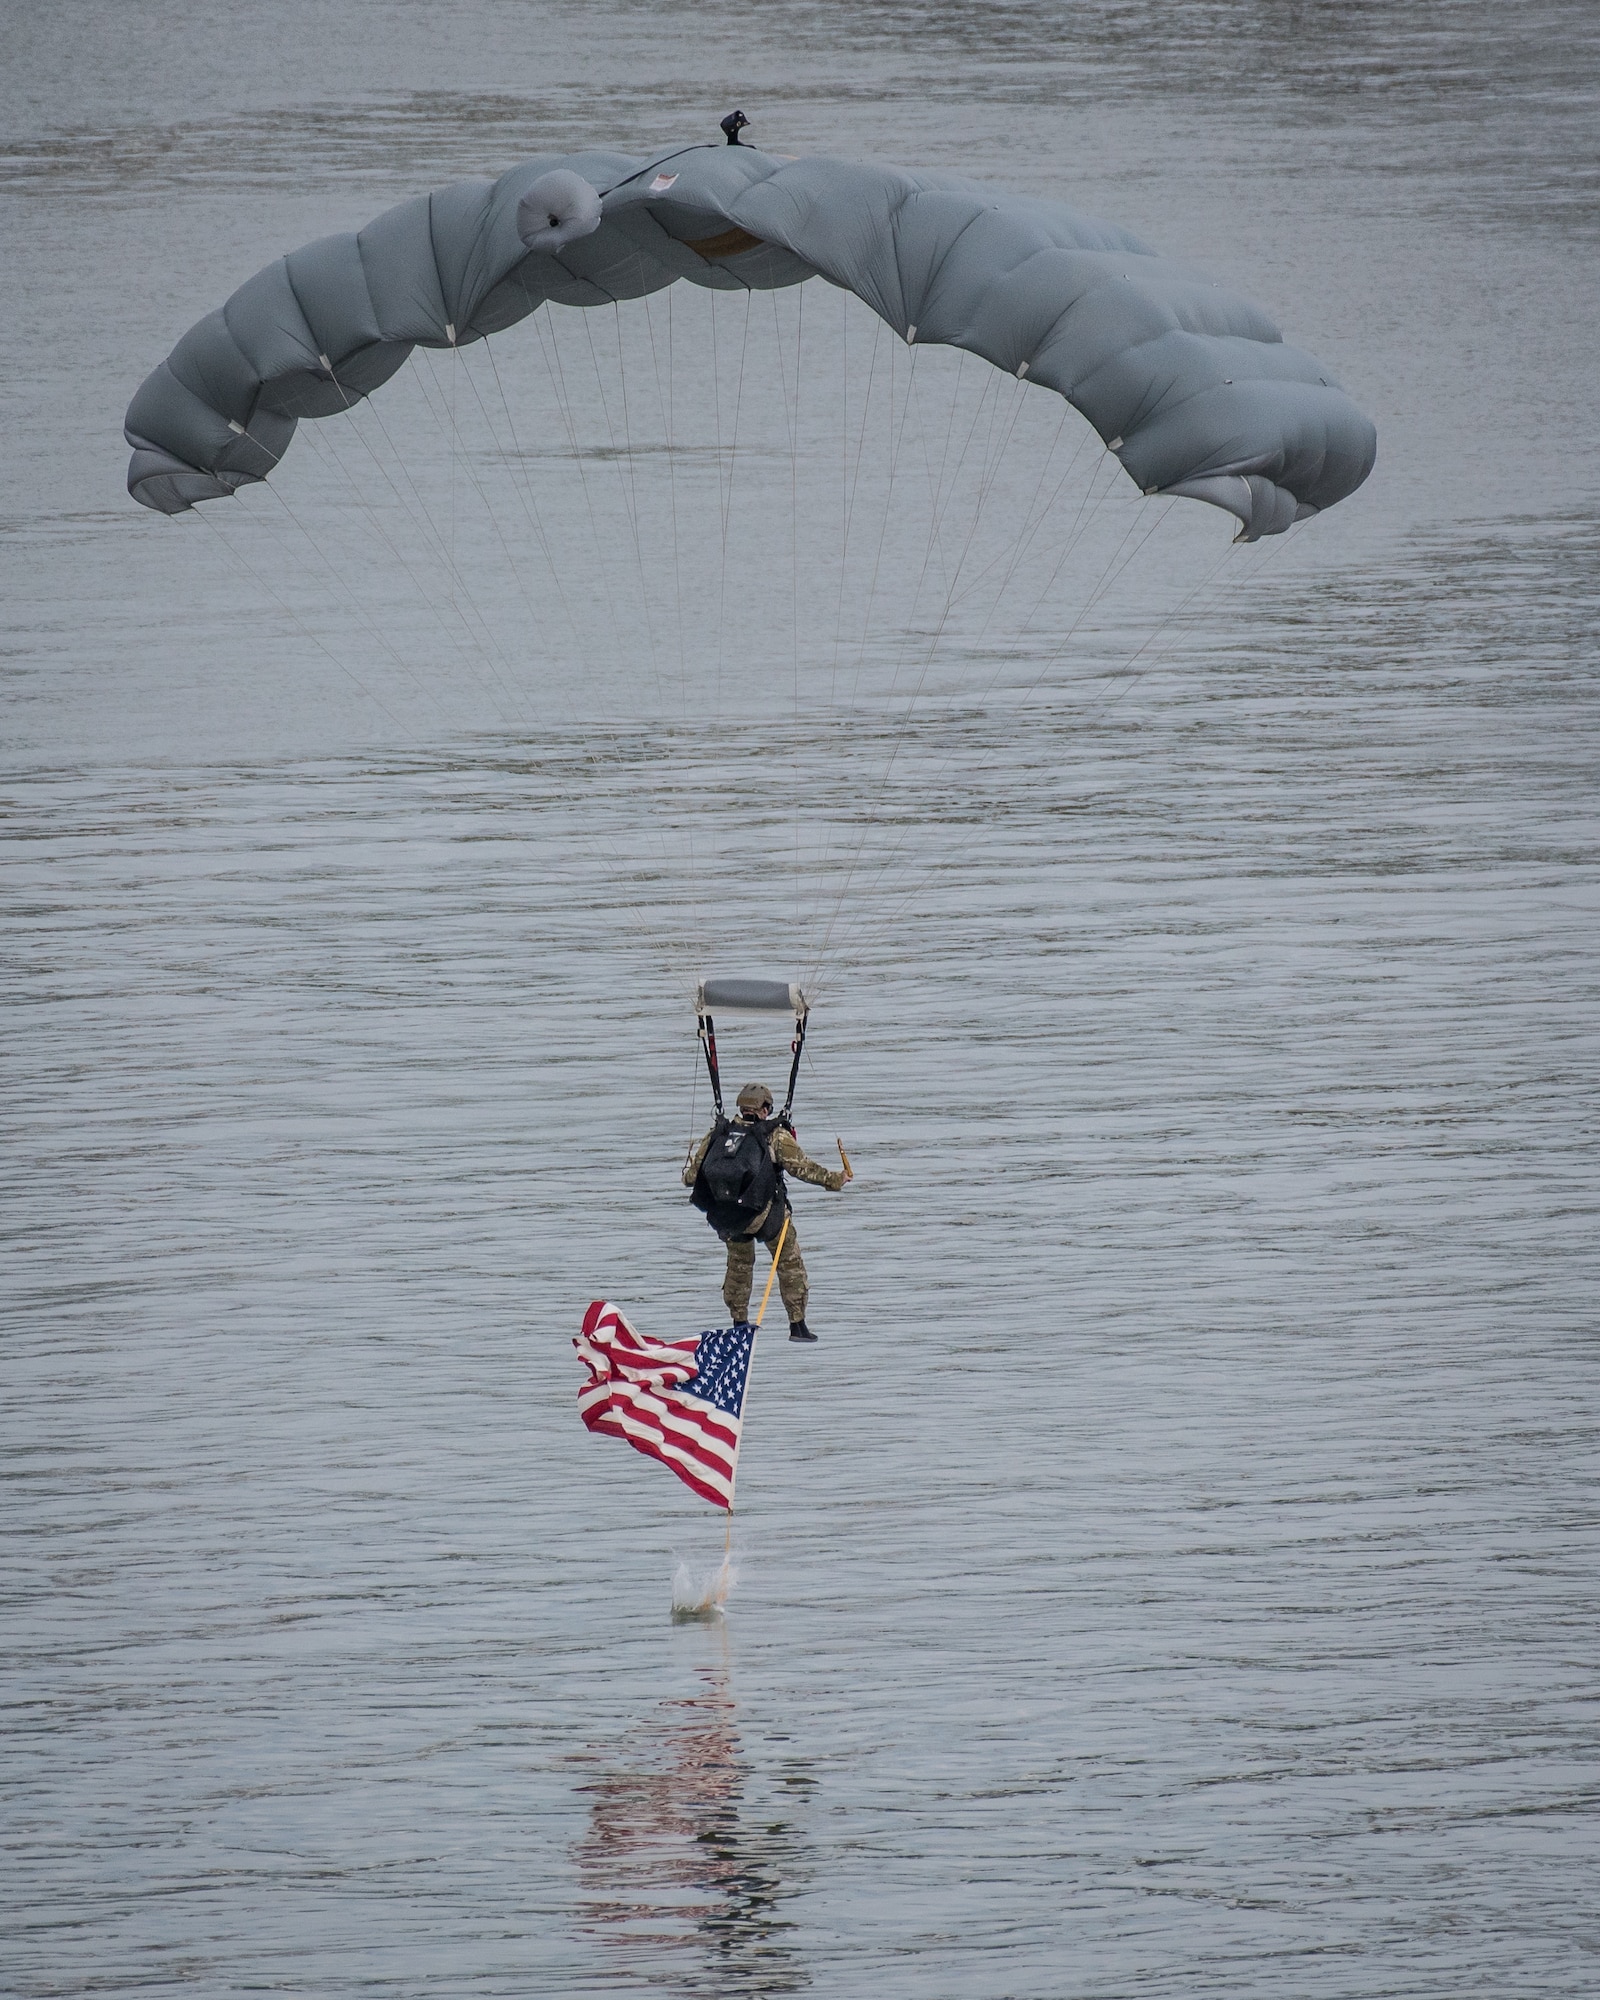 A Special Operator from the Kentucky Air National Guard’s 123rd Special Tactics Squadron parachutes into the Ohio River during the annual Thunder Over Louisville airshow in Louisville, Ky., April 13, 2019. Hundreds of thousands of spectators turned out to view the event, which has grown to become one of the largest single-day air shows in North America. (U.S. Air National Guard photo by Dale Greer)